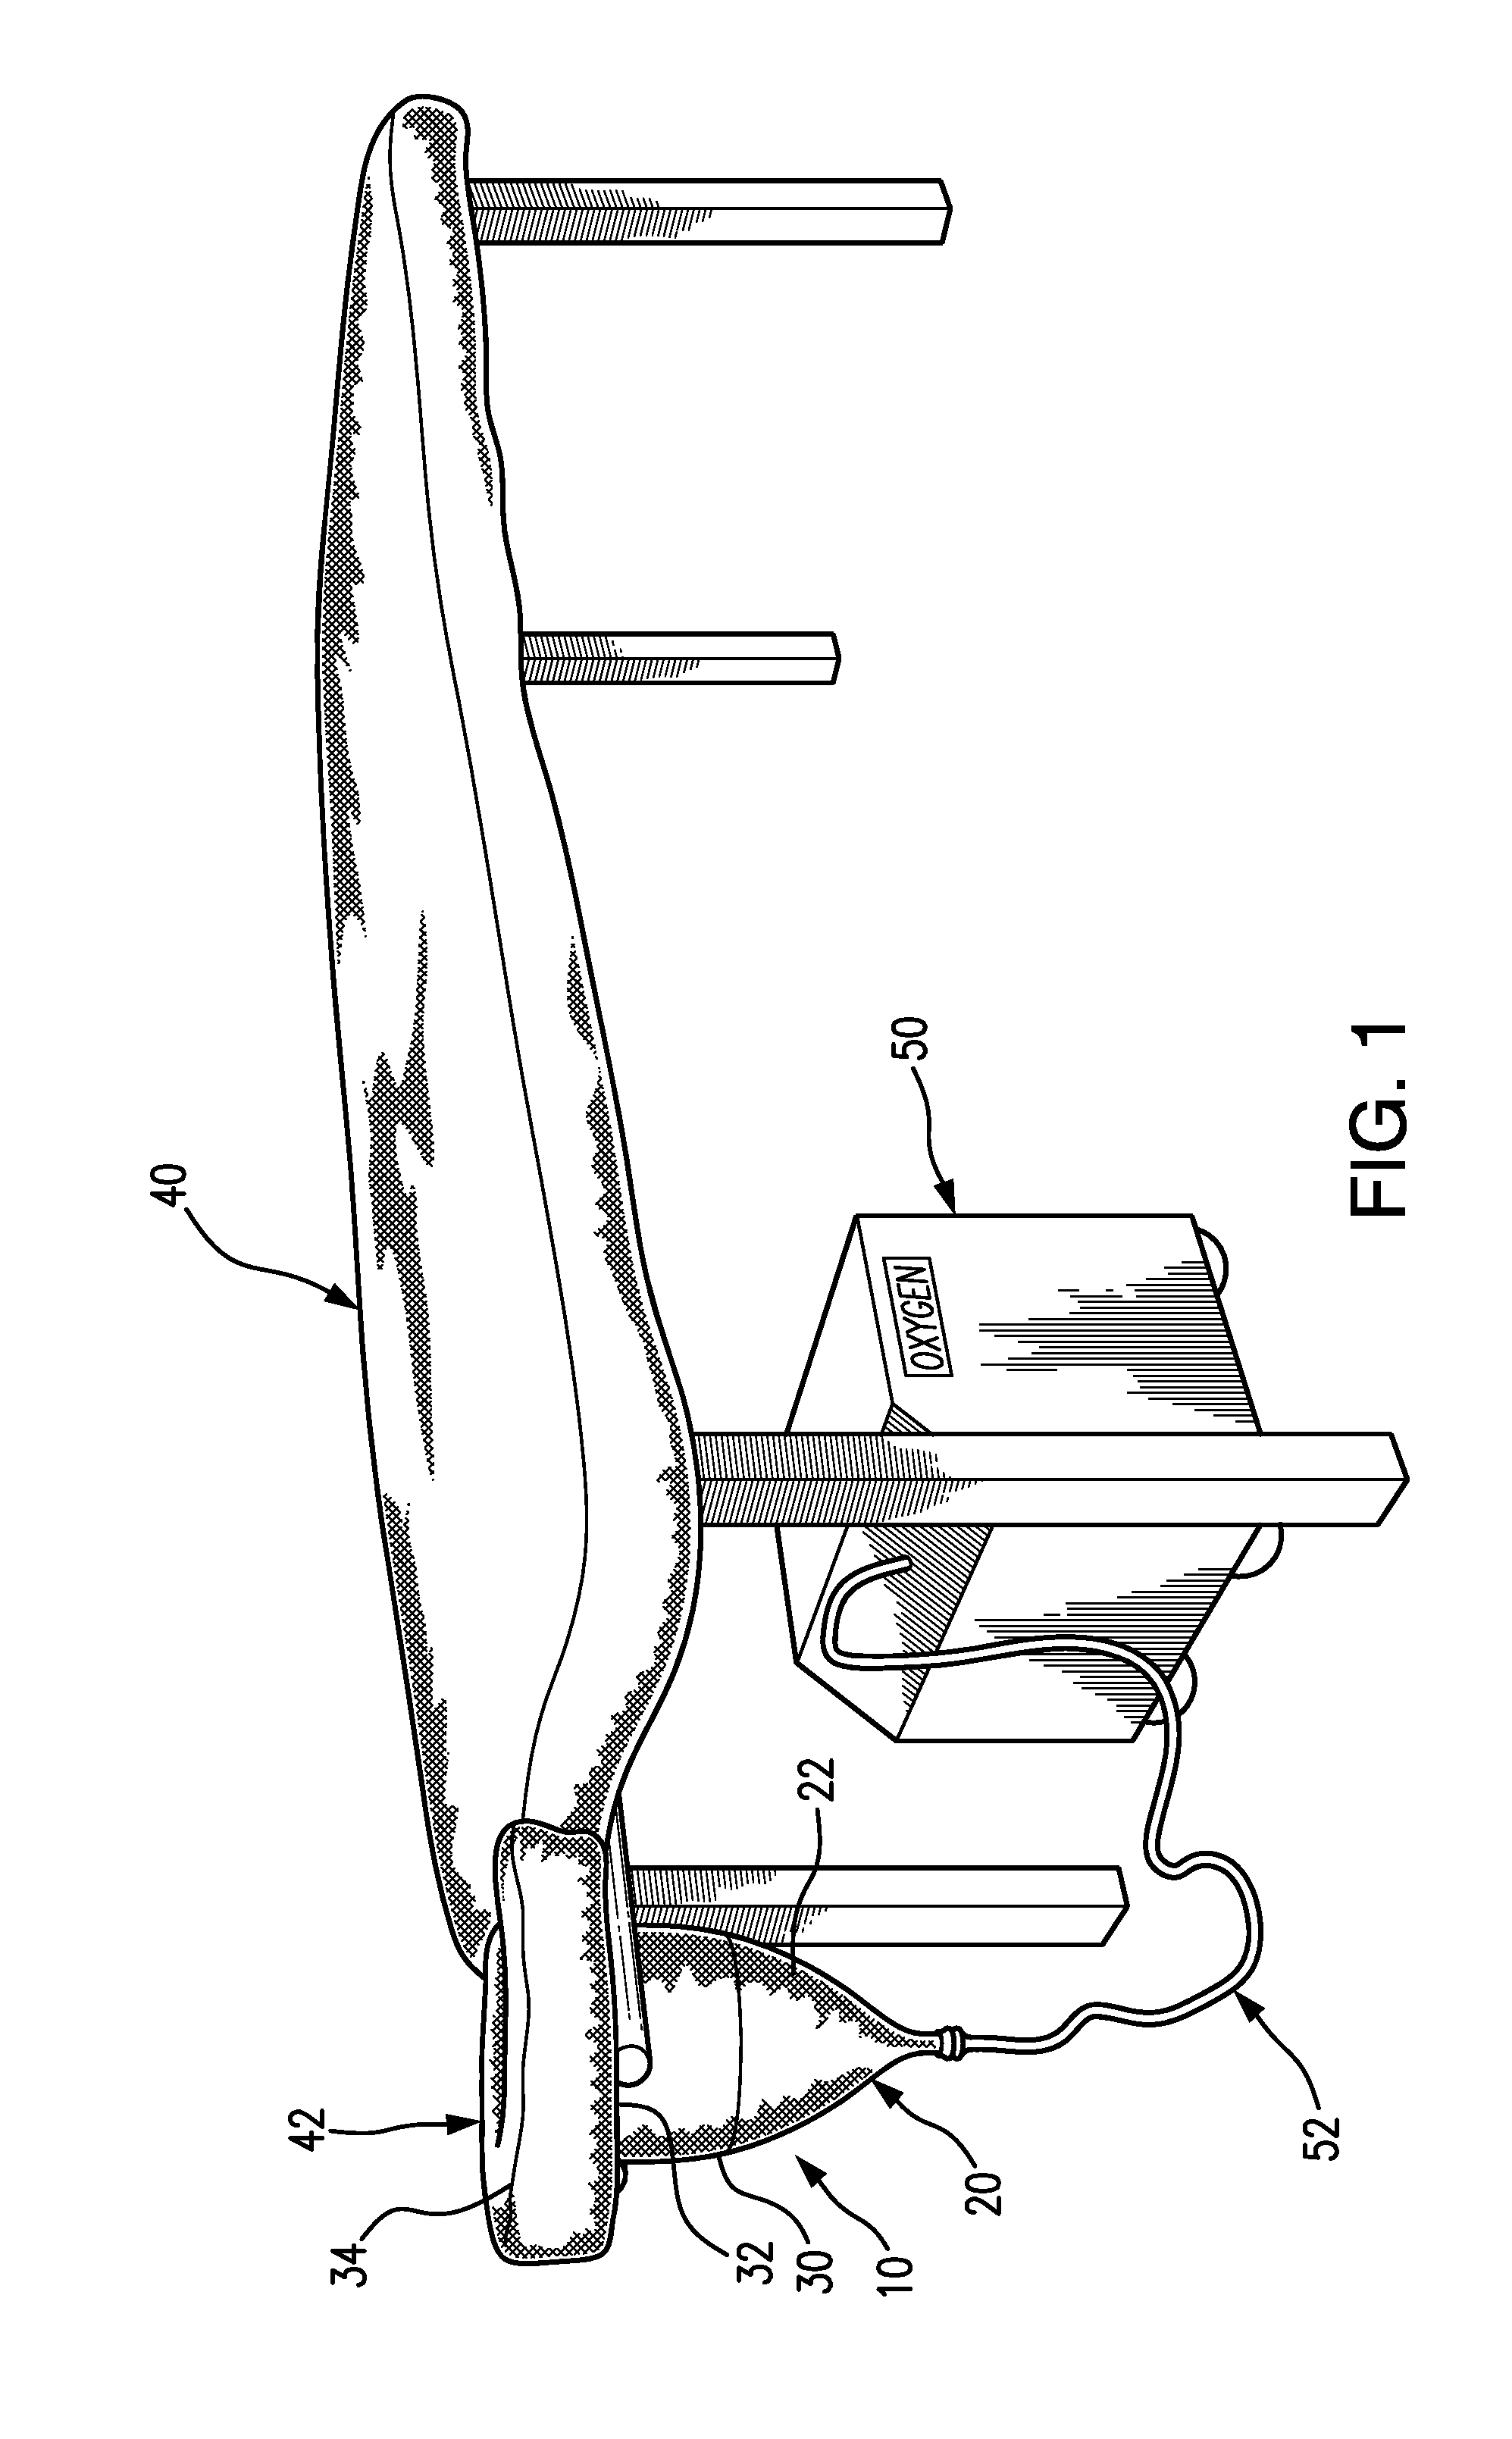 Oxygen and aromatherapy delivery apparatus for a massage table